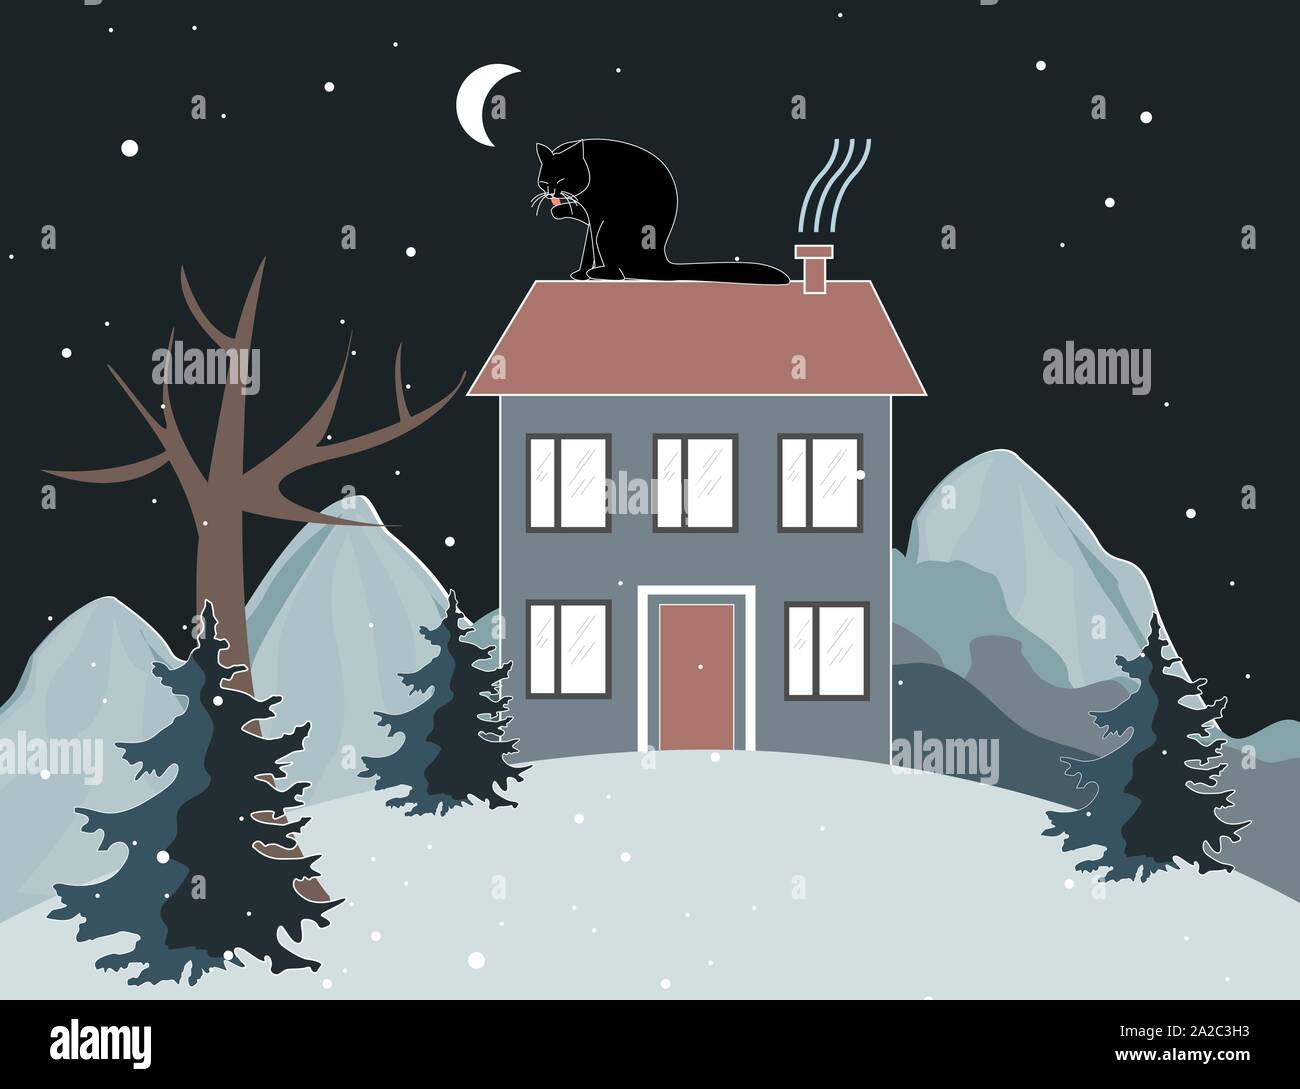 Winter mountains landscape with a cat is seating on the house roof. Trees and house on the hill at night. Winter background Stock Vector